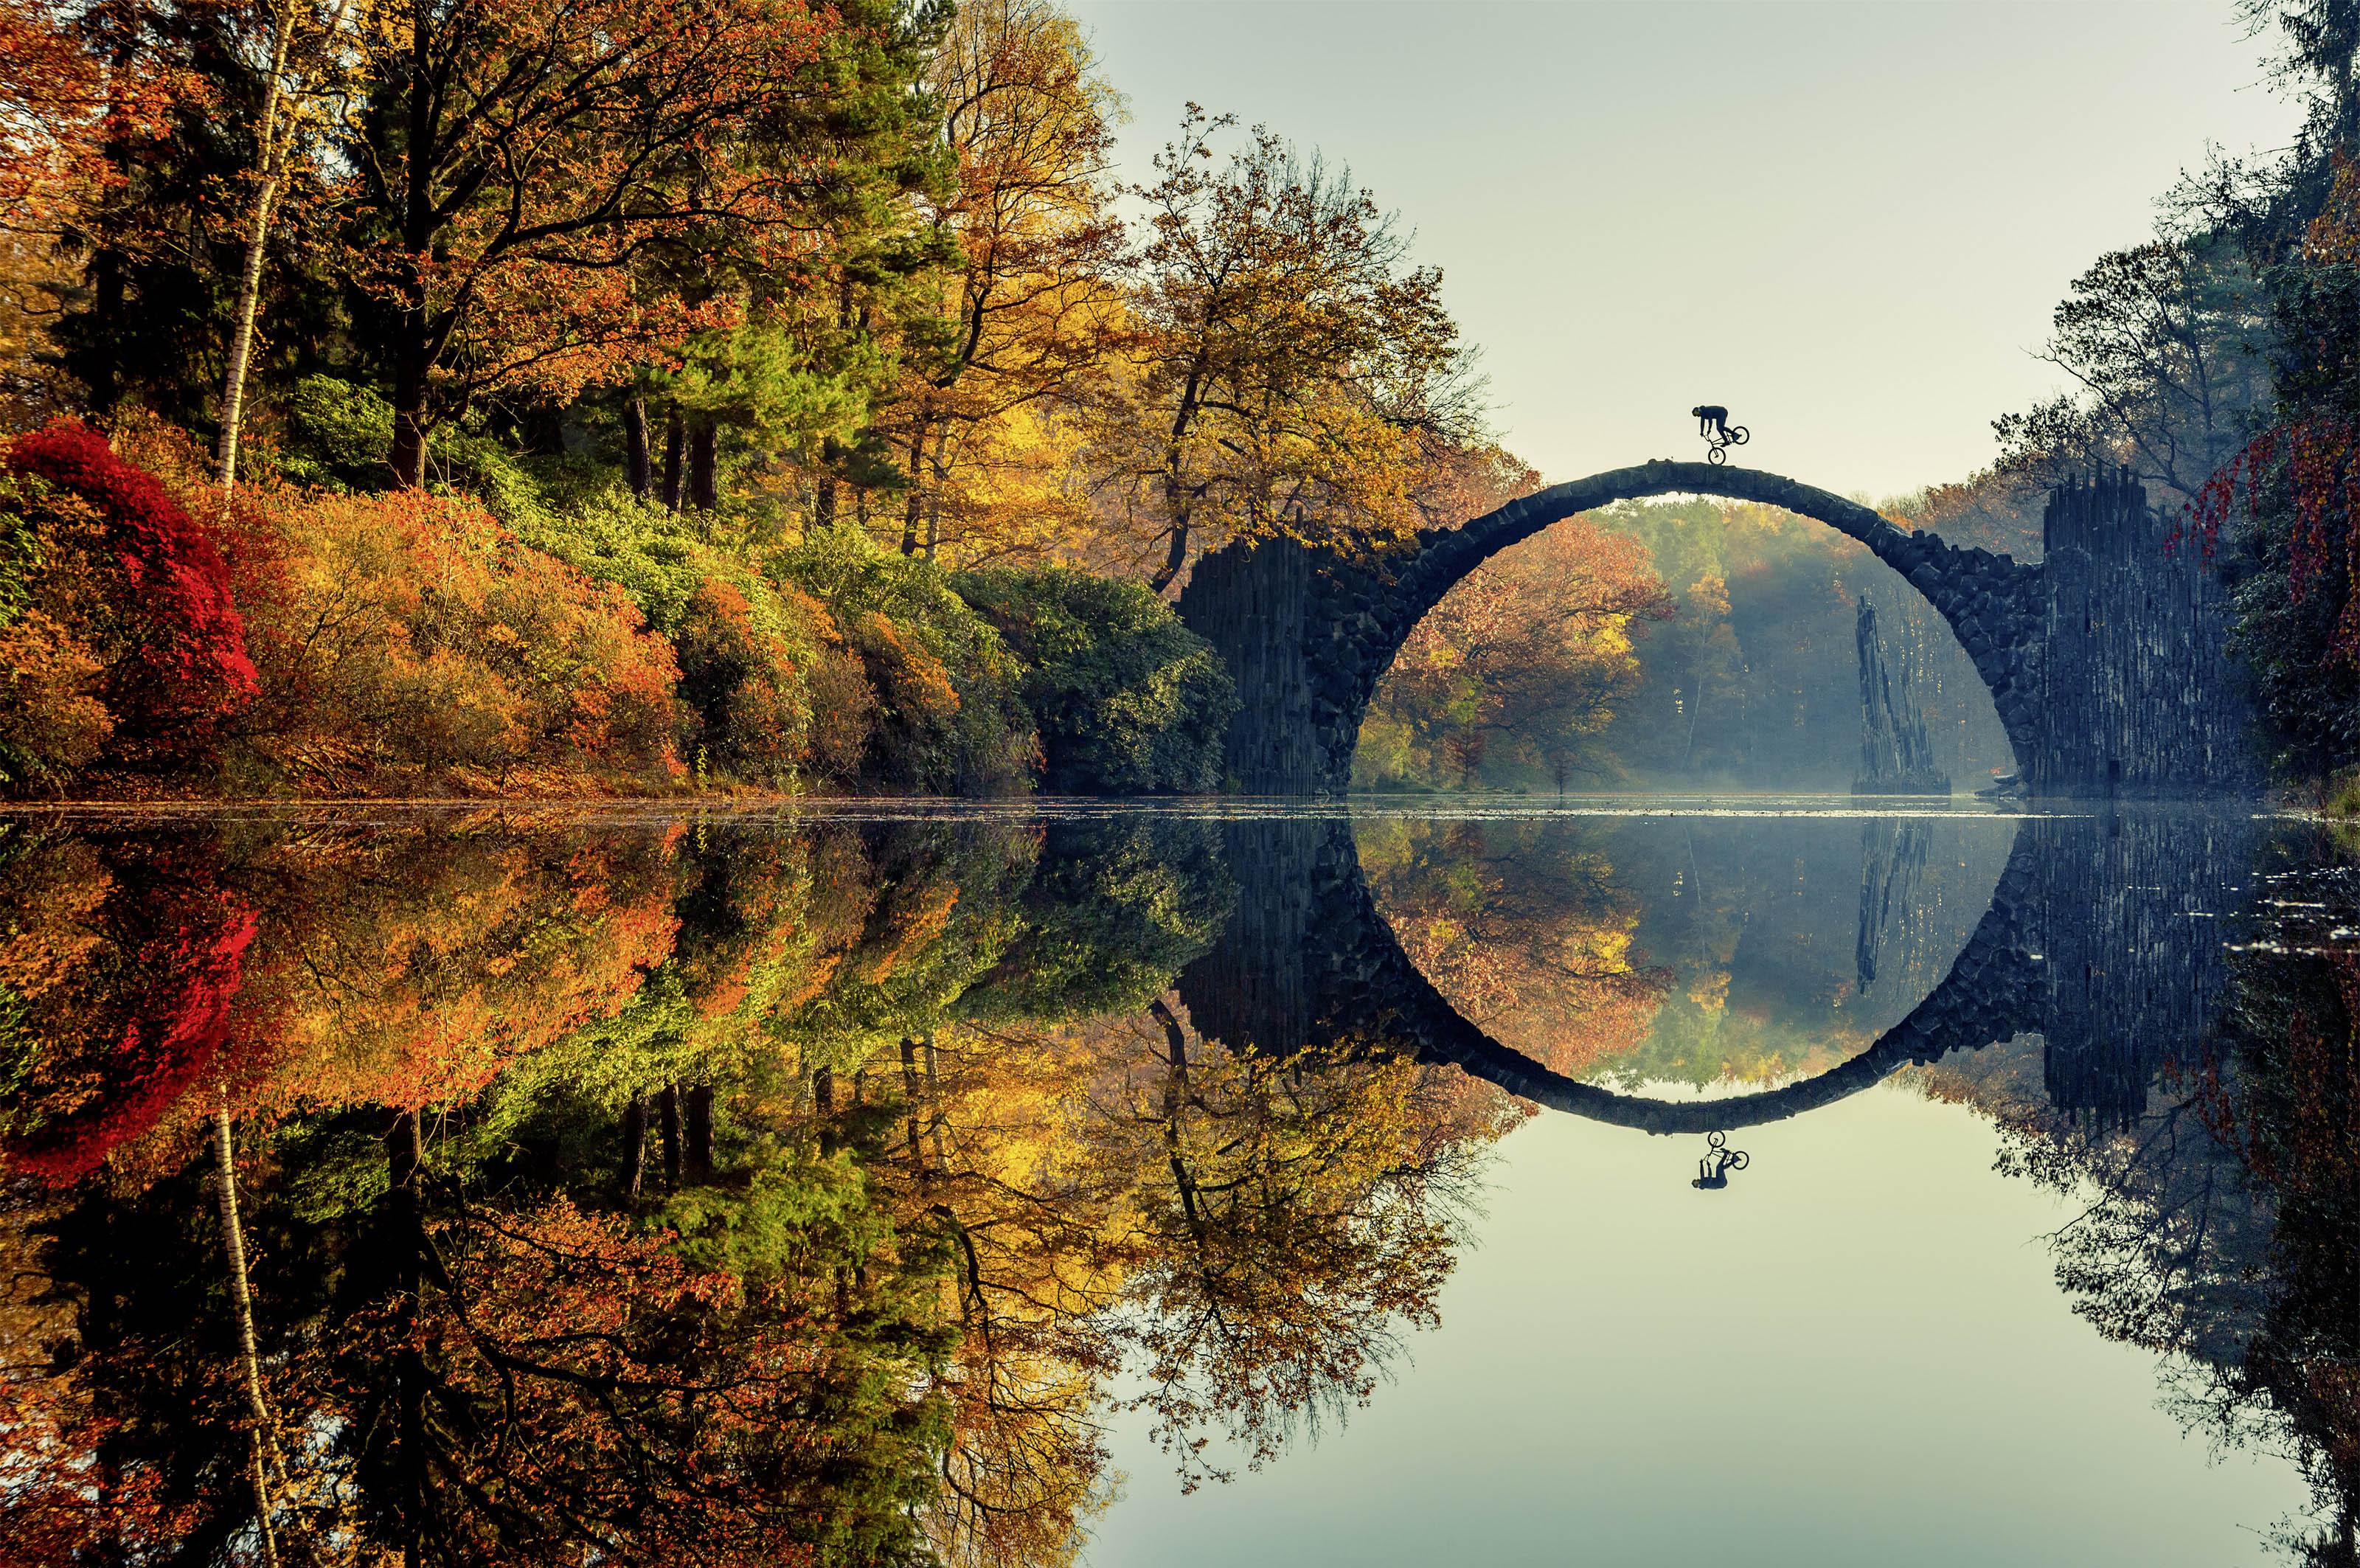 Lorenz Holder of Germany was the overall winner of the 2016 Red Bull Illume contest. The photo shows Senad Grosic ride his bike over a bridge in an autumnal Gablenz, Germany. (Lorenz Holder / Red Bull Illume)